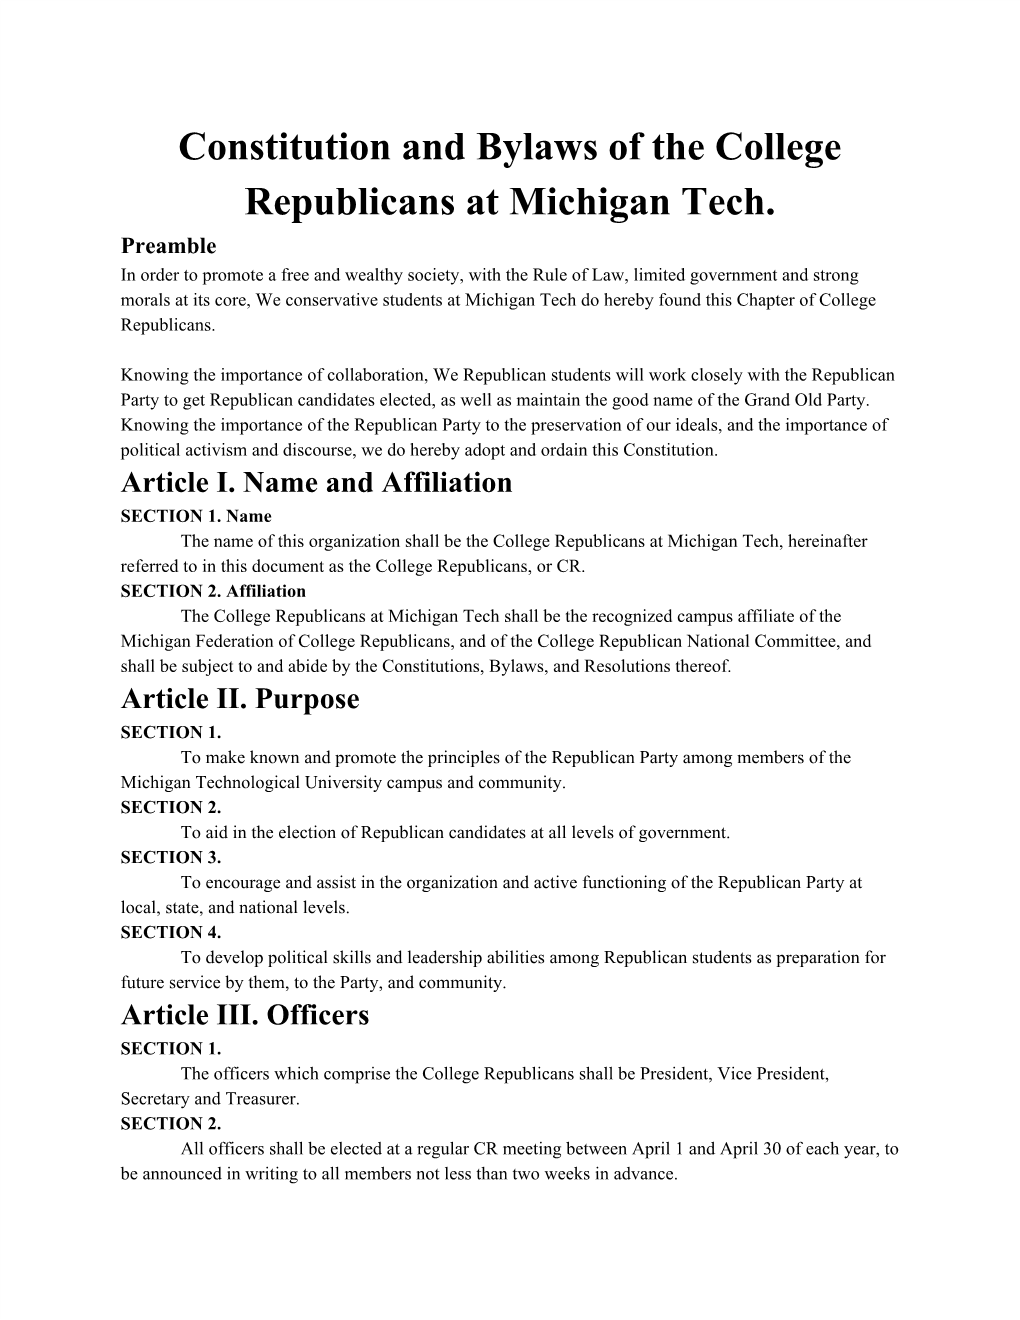 Constitution and Bylaws of the College Republicans at Michigan Tech